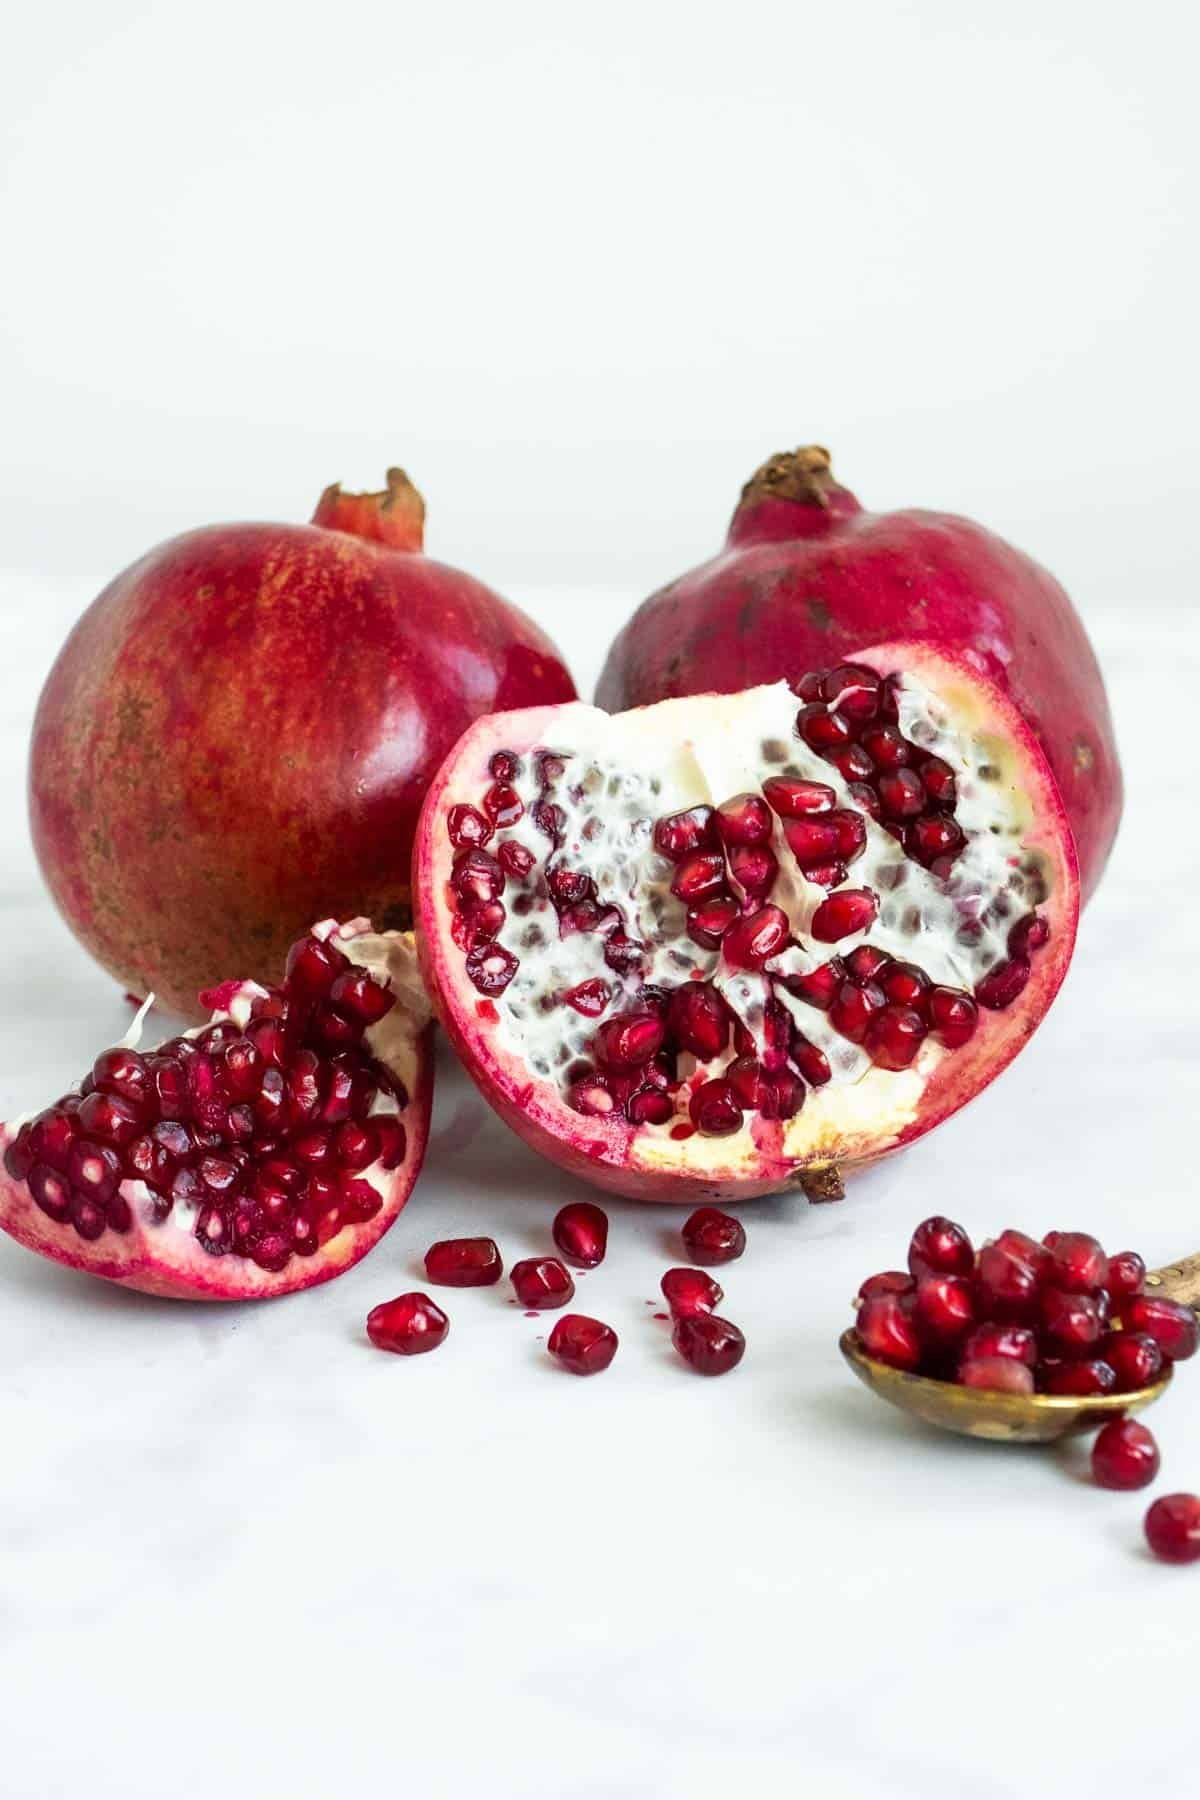 a close up of 3 pomegranates, two whole and one sectioned exposing the inside next to a gold spoon containing pomegranate seeds.